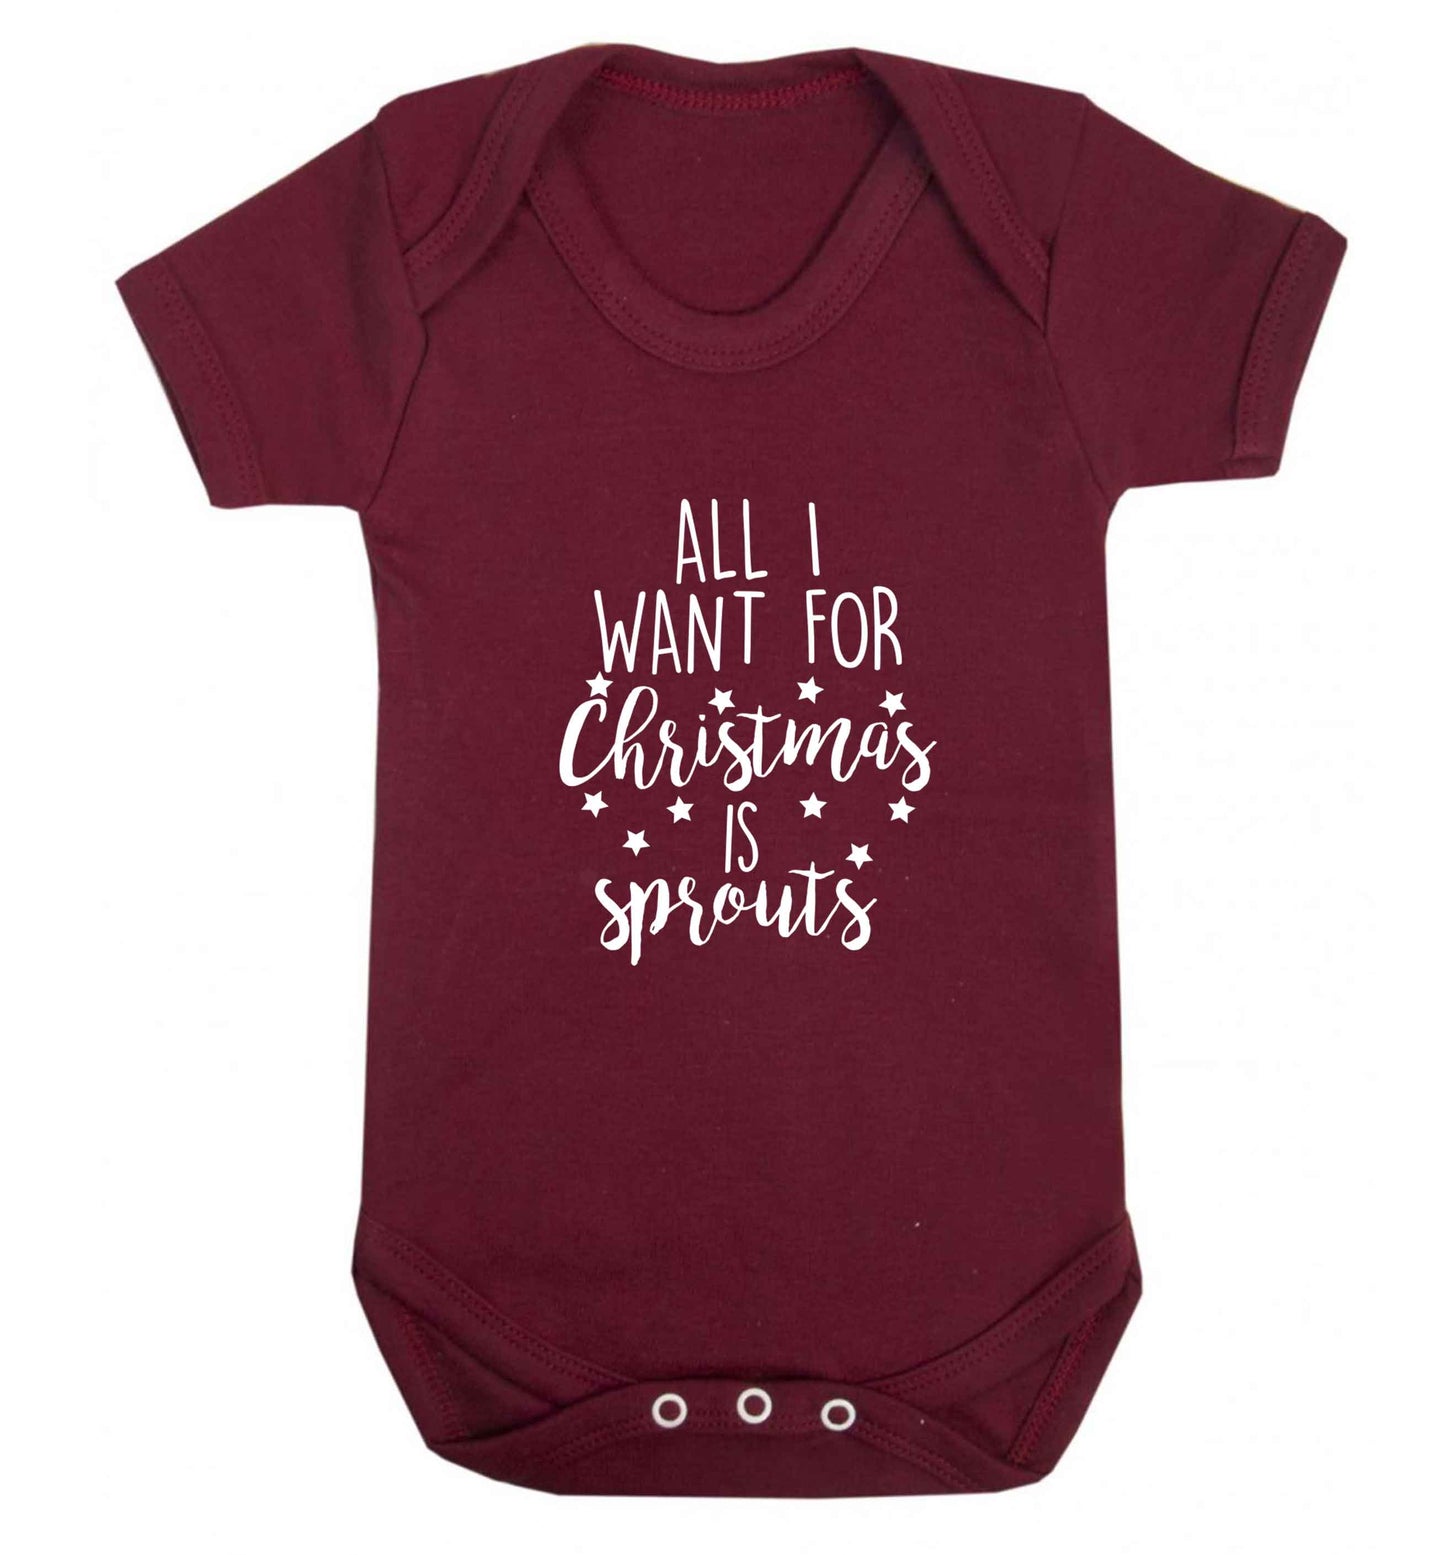 All I want for Christmas is sprouts baby vest maroon 18-24 months